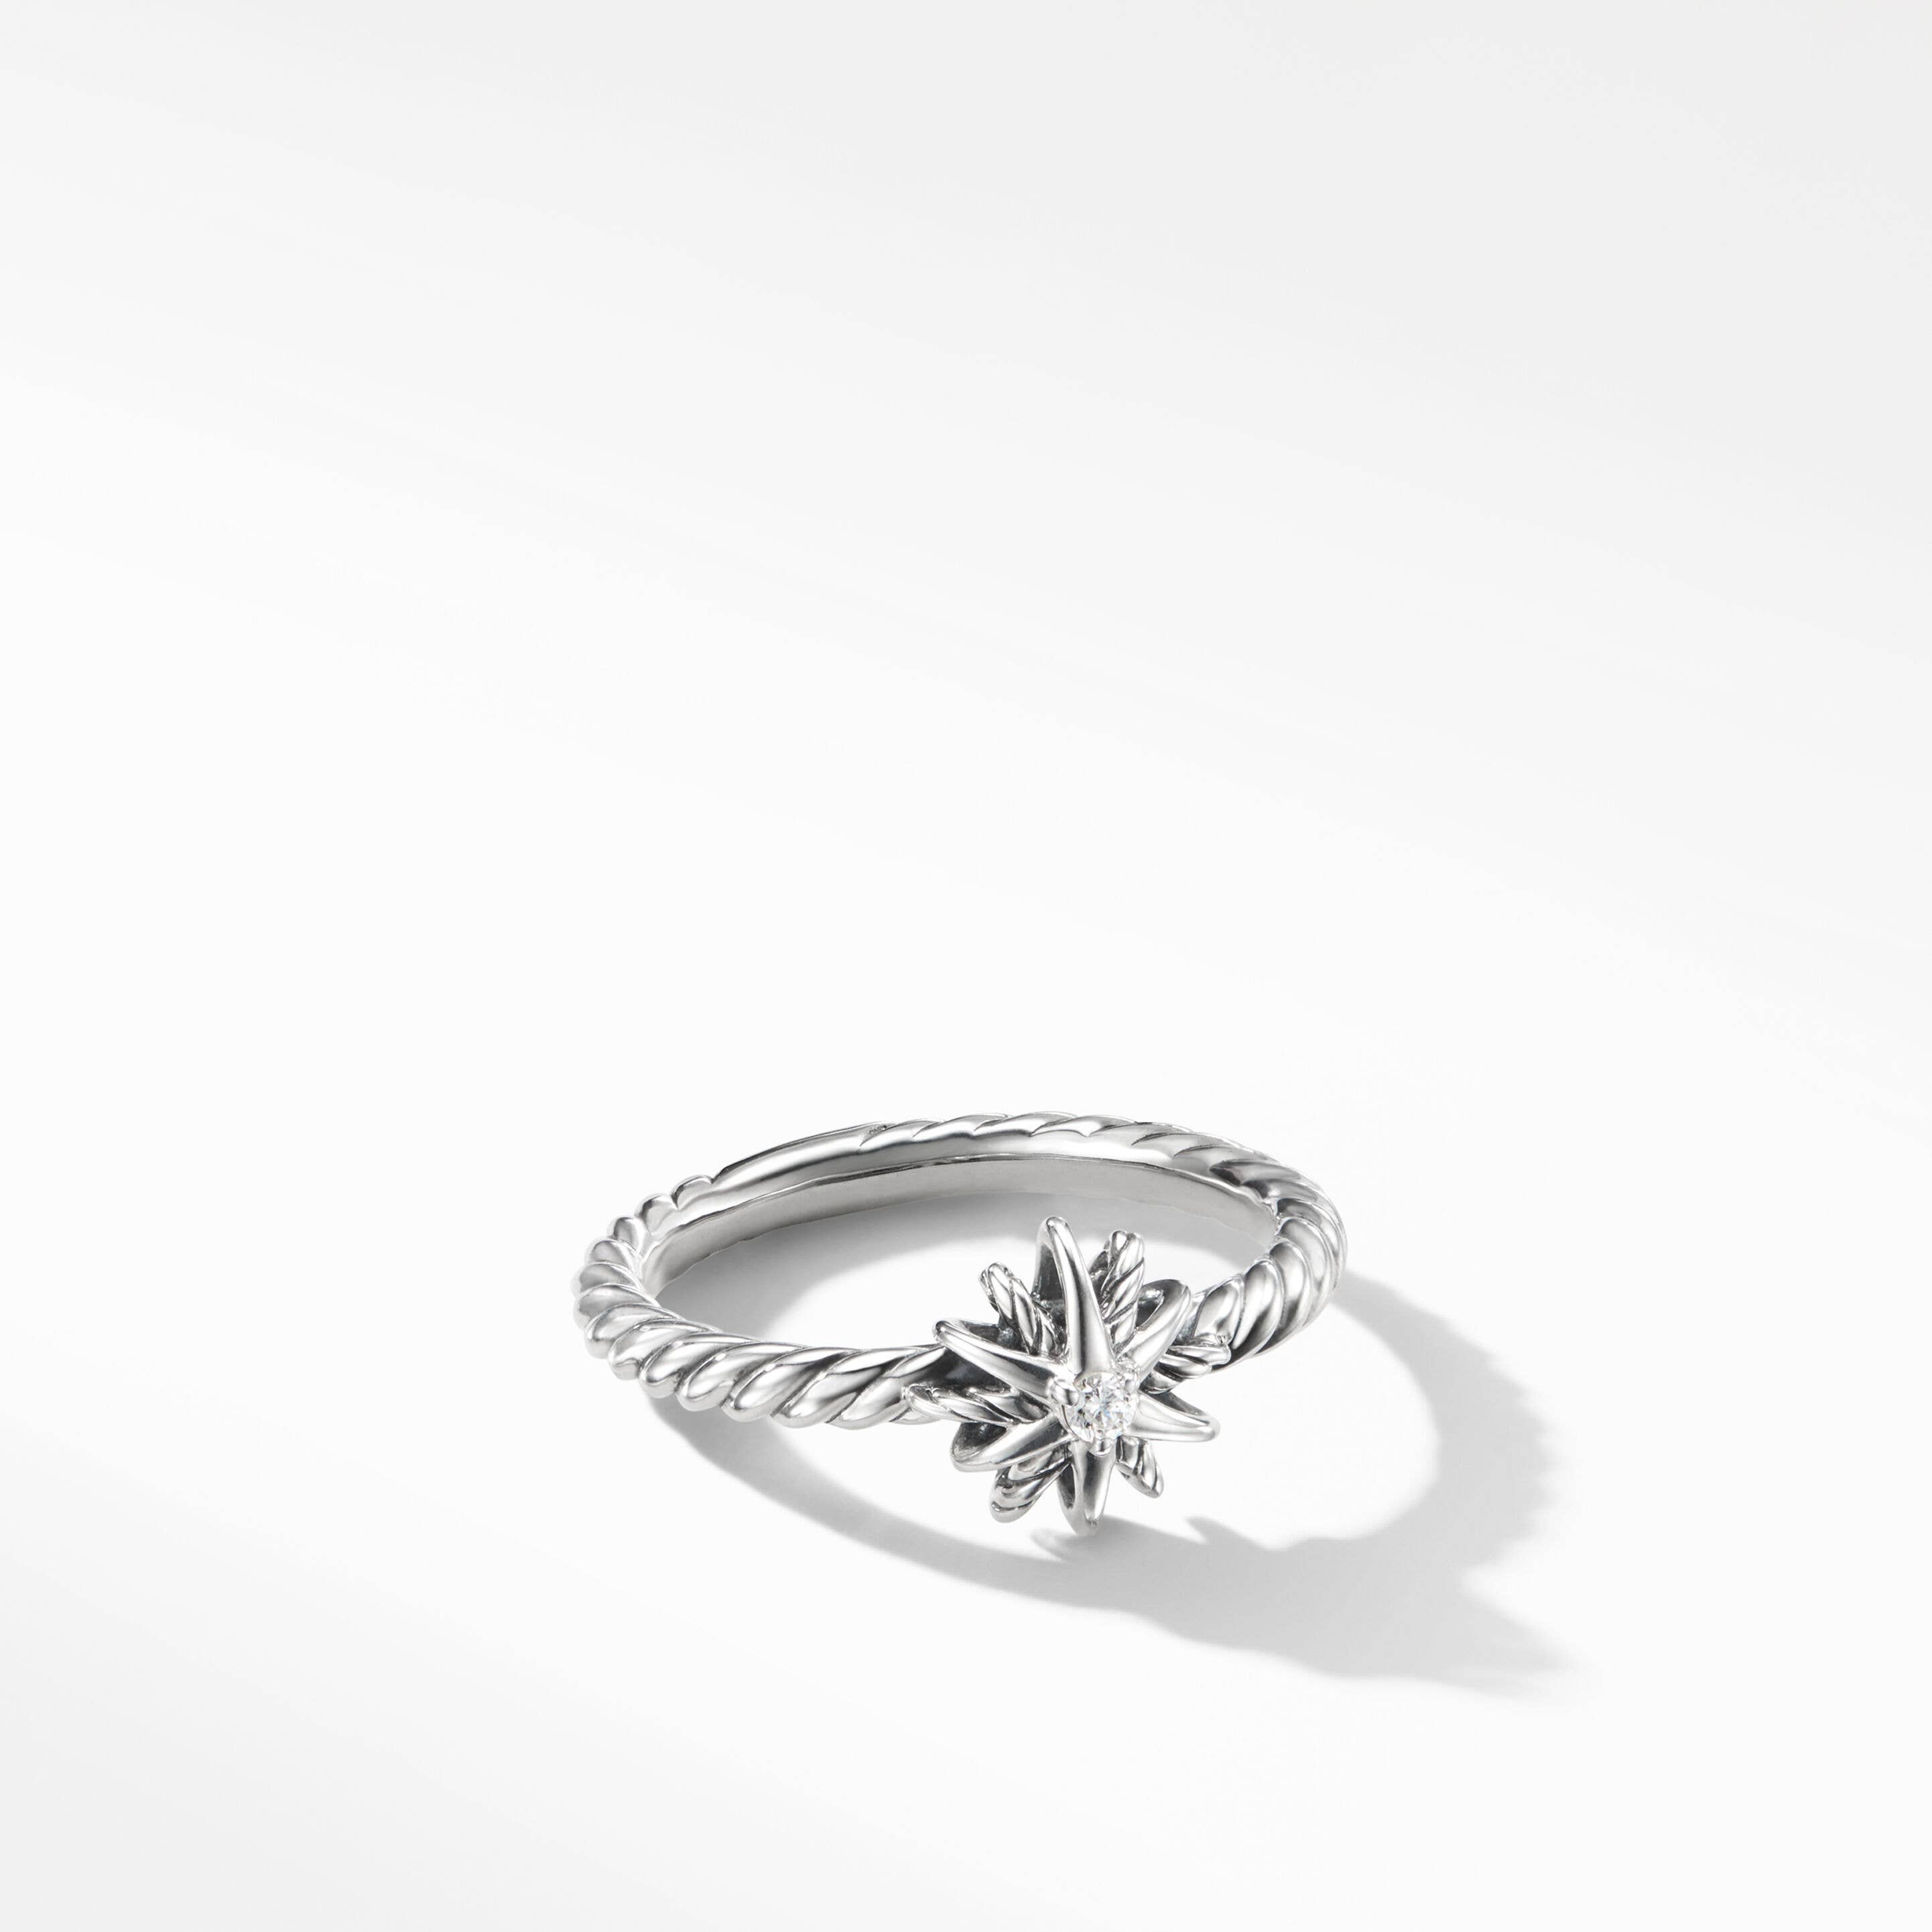 Starburst Kids Ring in Sterling Silver with Center Diamond